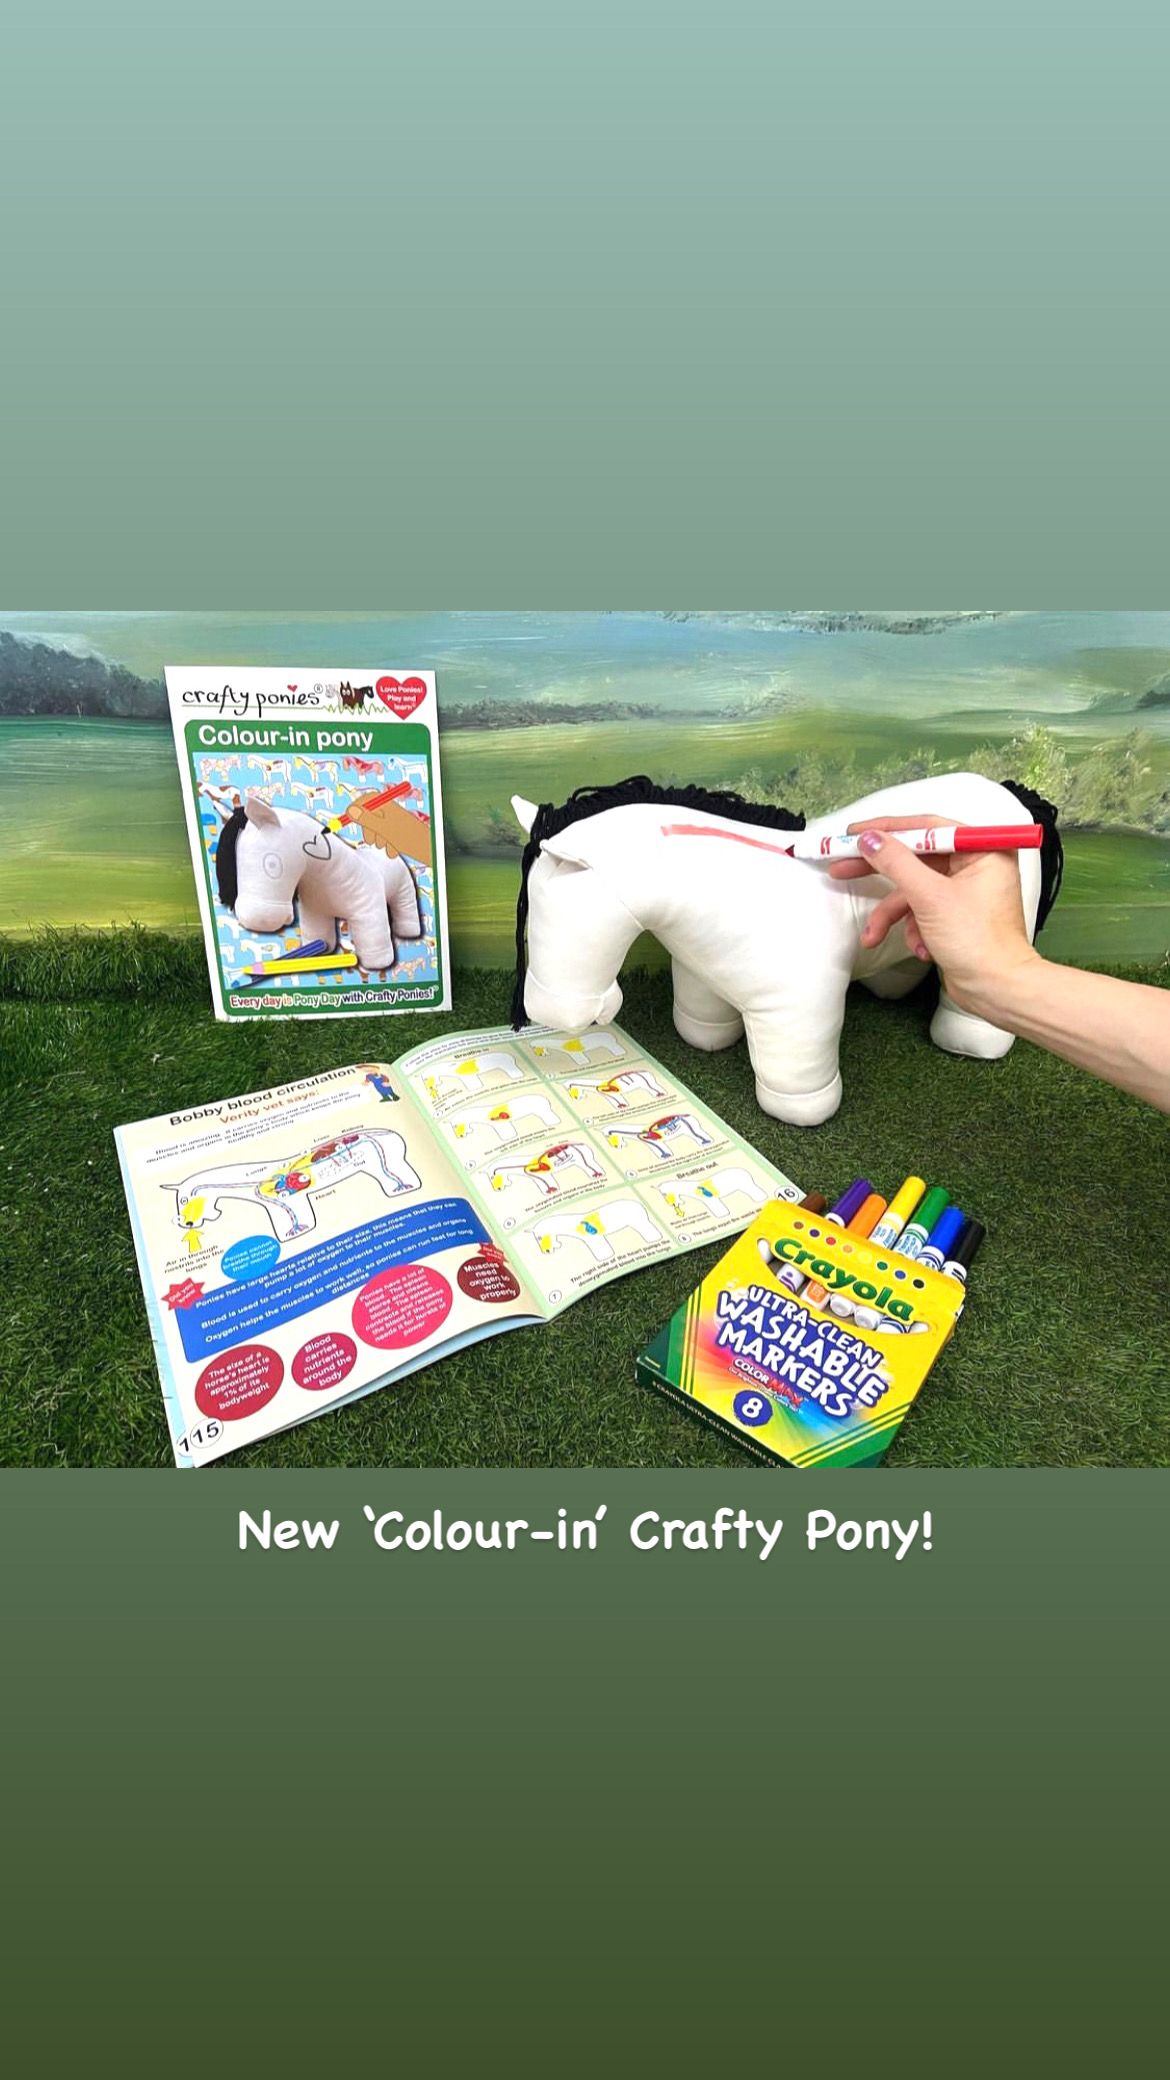 Crafty colour-in Pony, with information booklet and washable pens